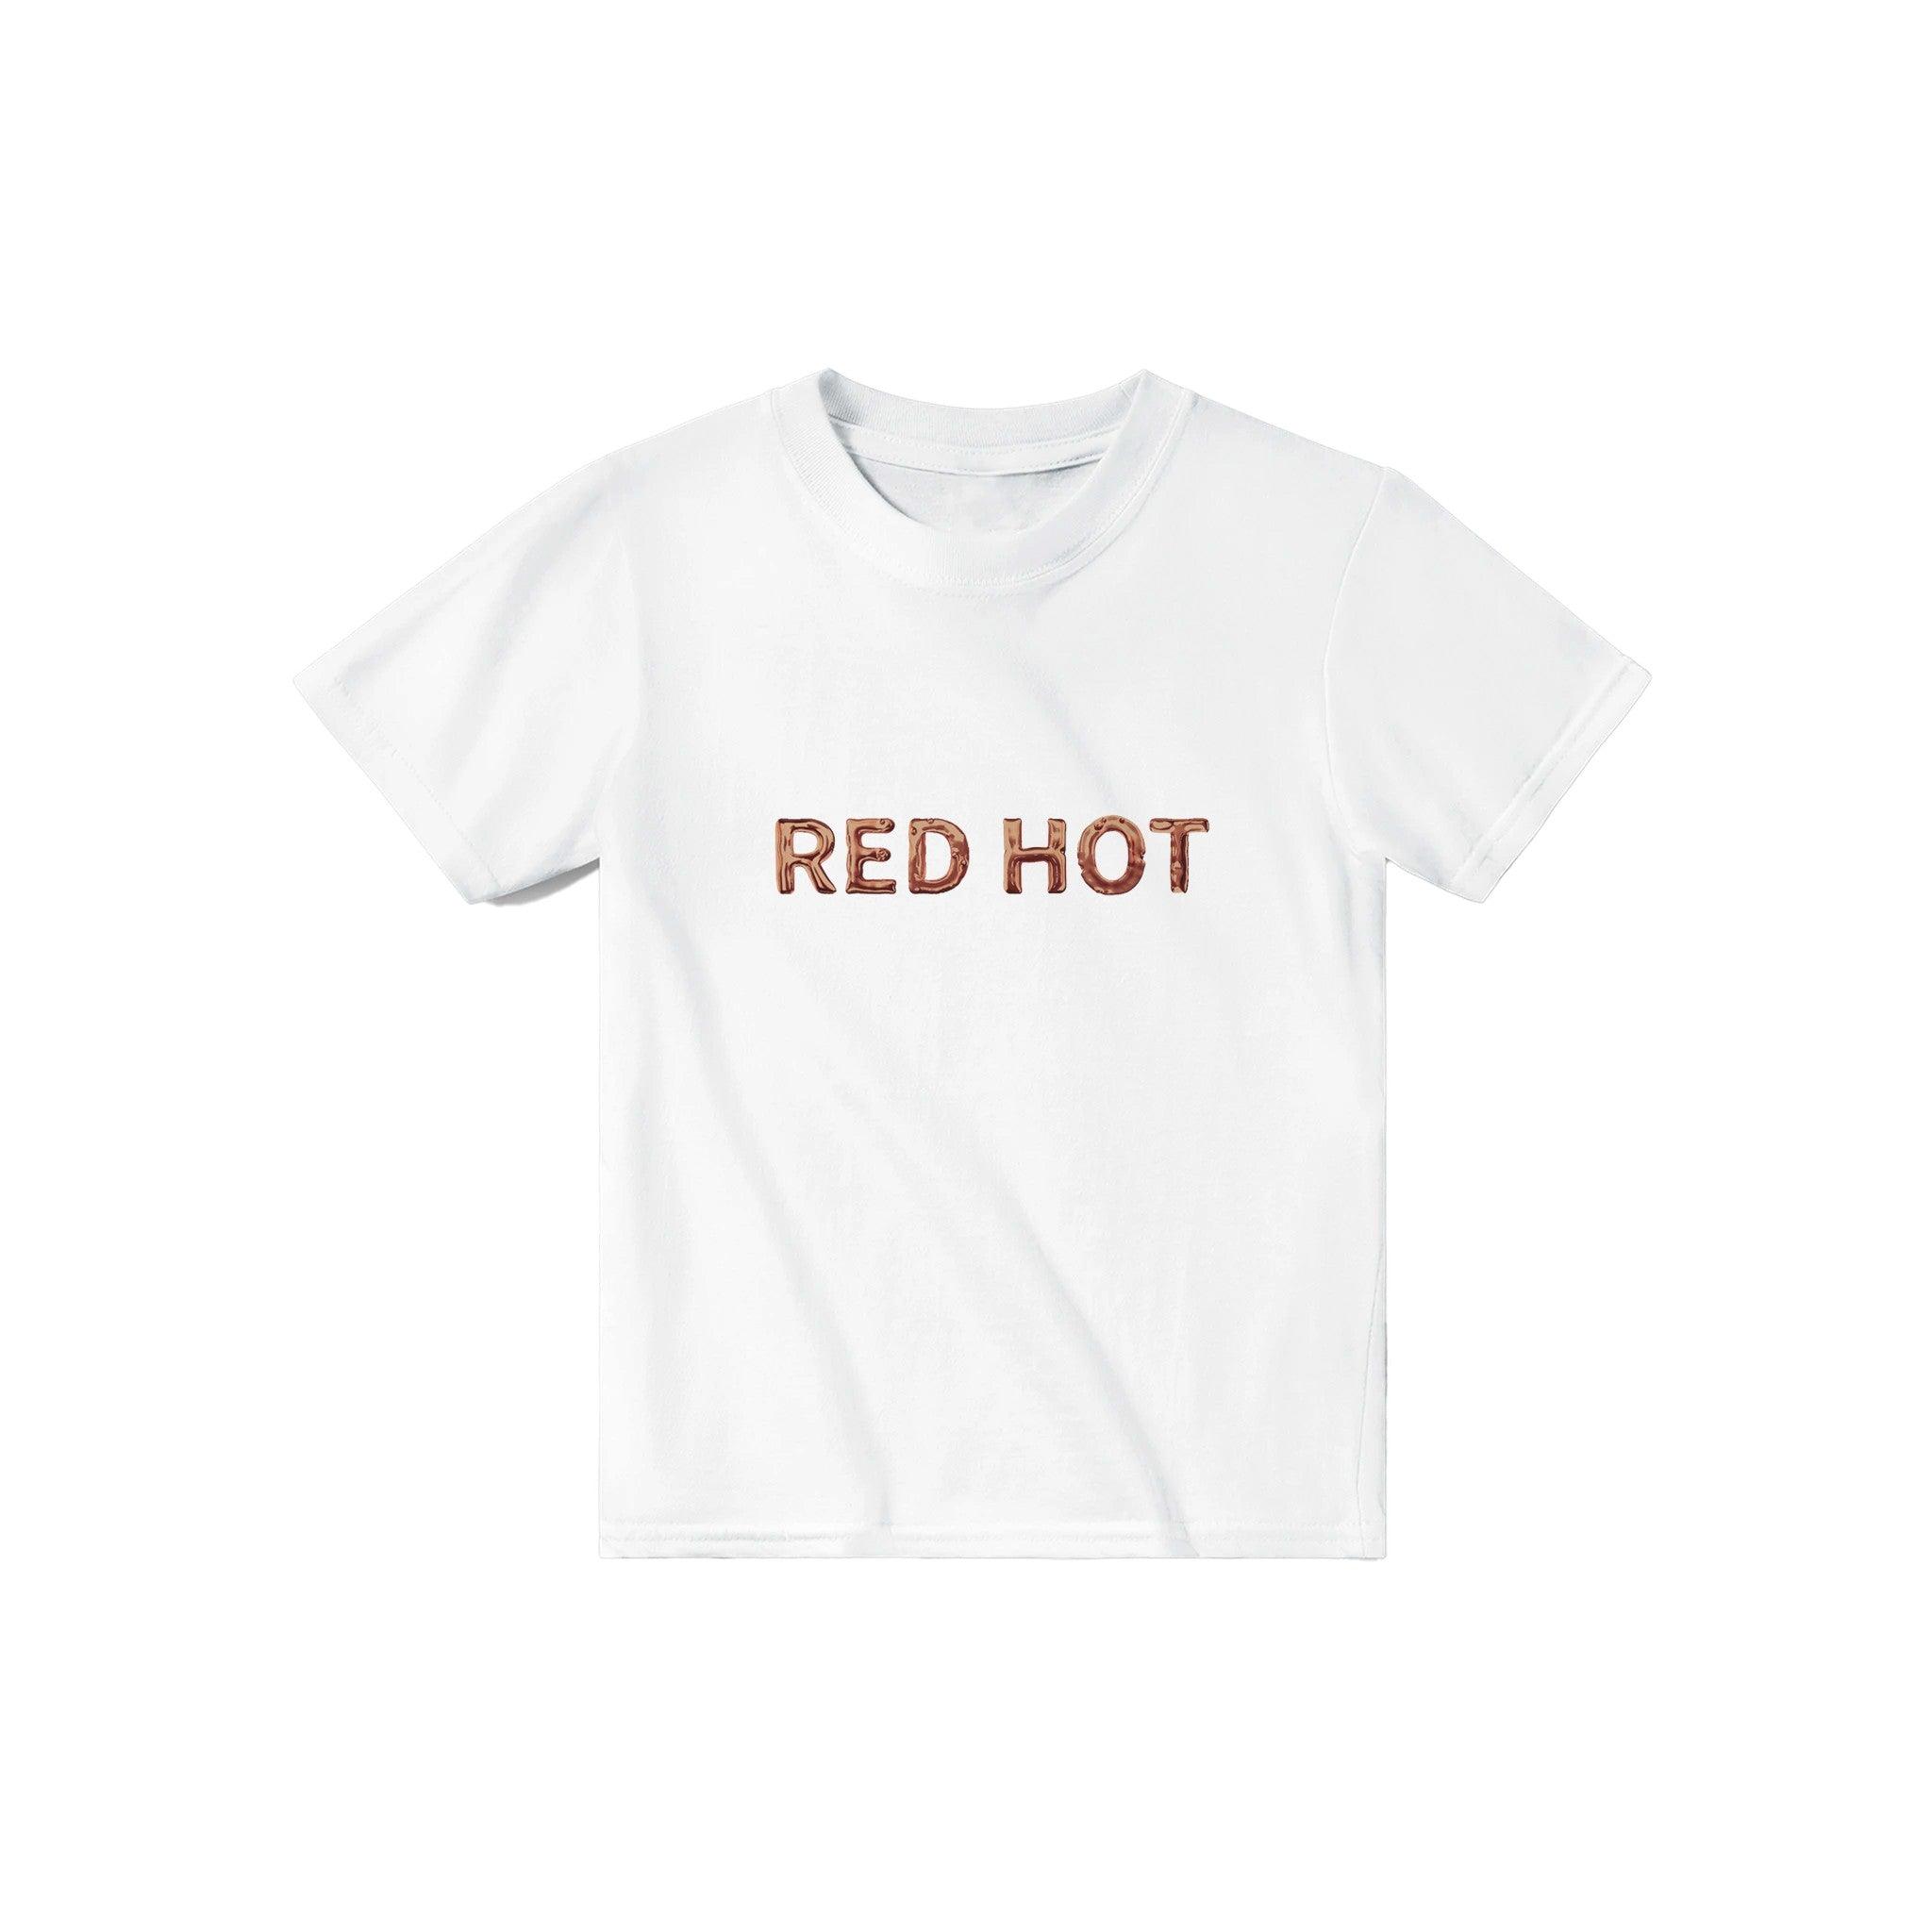 'Red Hot' Baby Tee - POMA